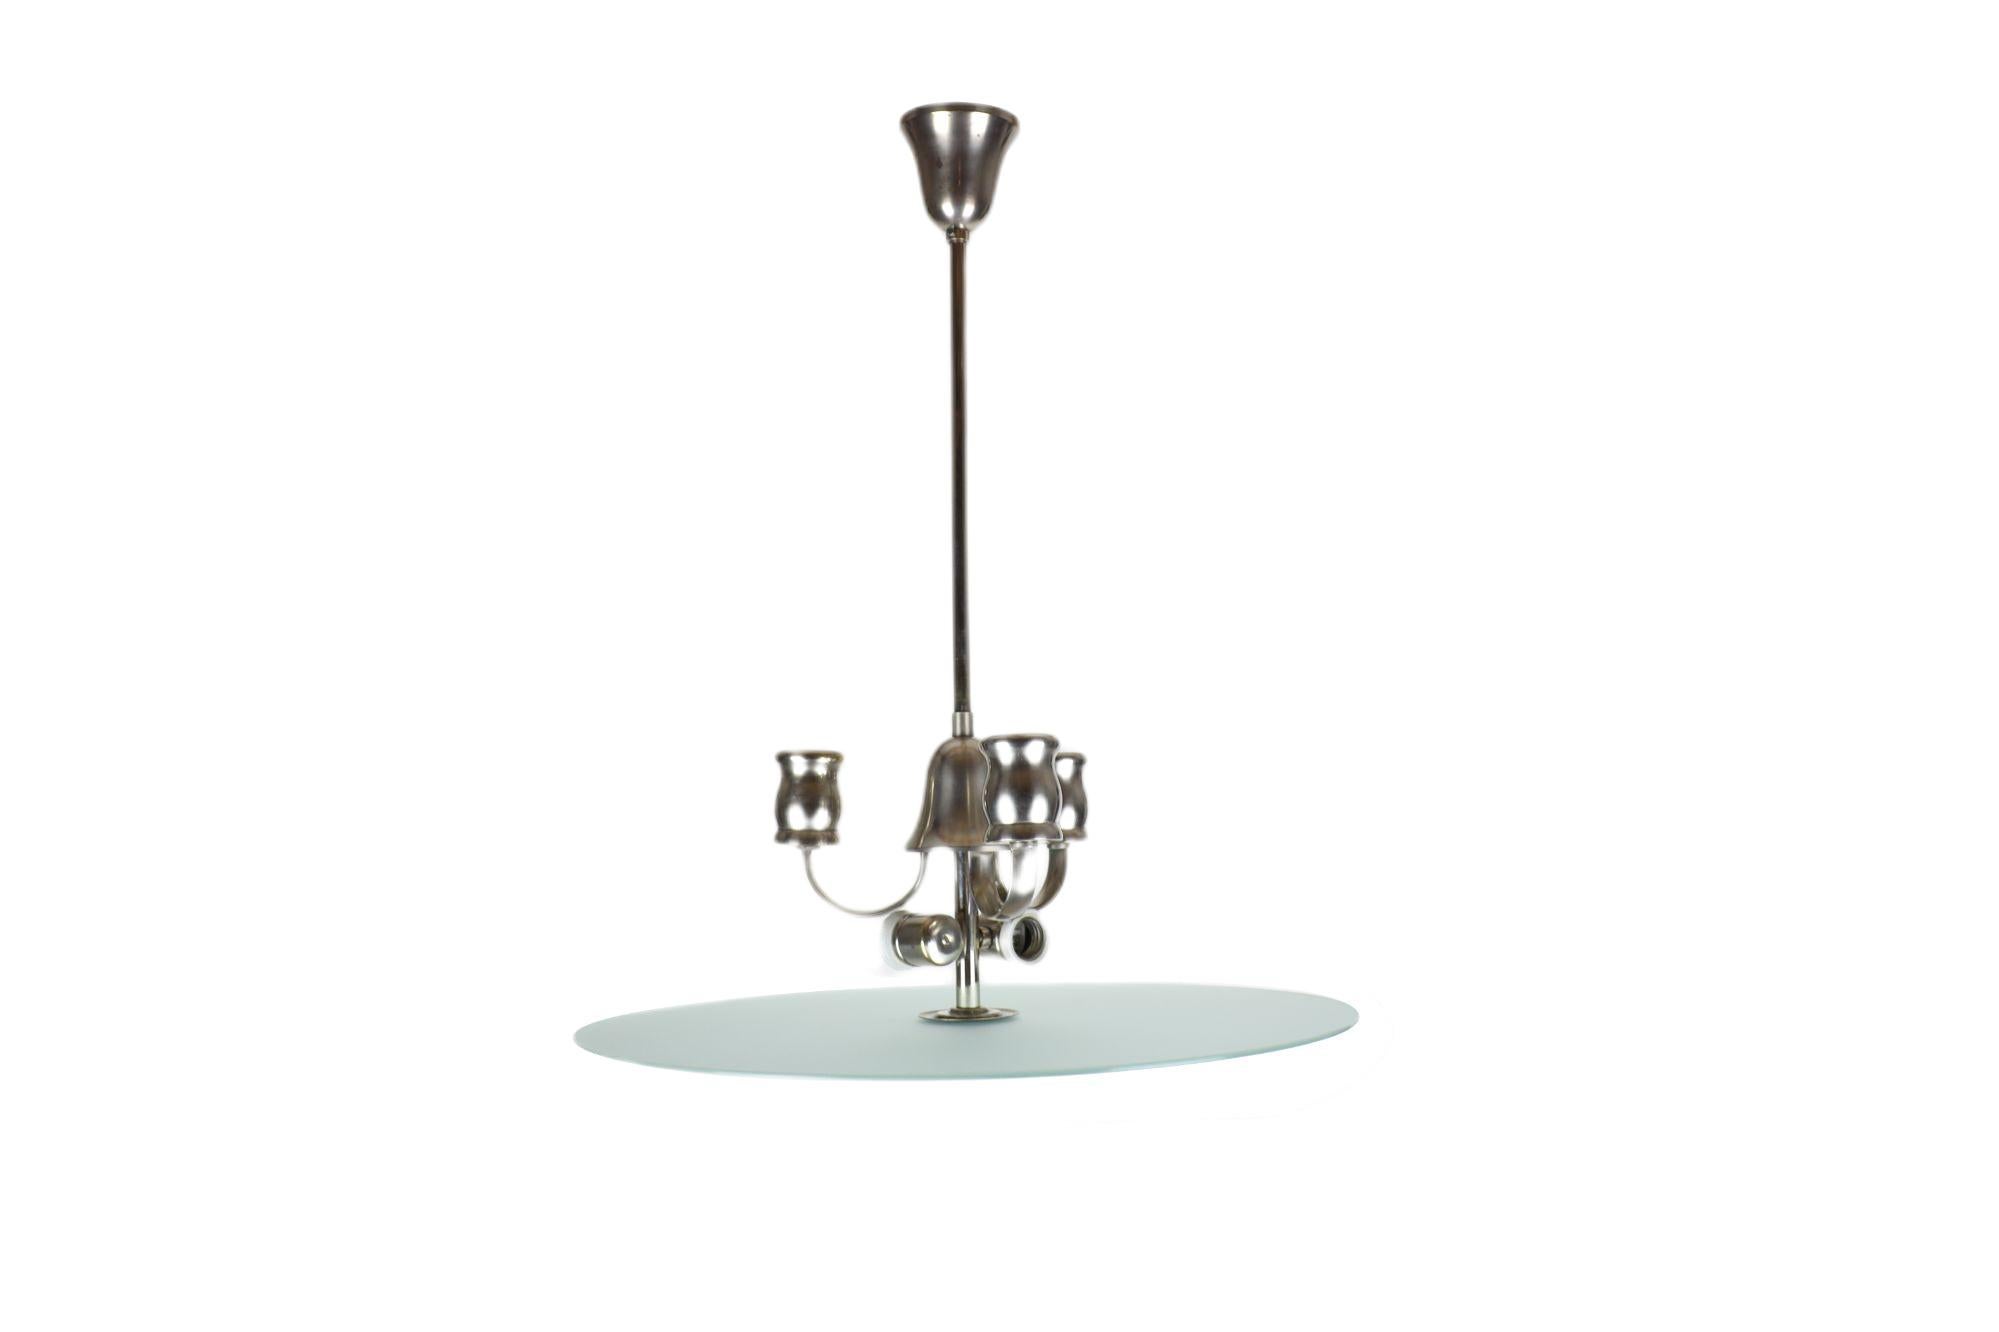 High-quality Art Deco luminaire which, thanks to its unique workmanship and design, perfectly decorates any interior. If you give room to your imagination, you may be struck by a sandblasted circular shade like a display case, behind which hides a